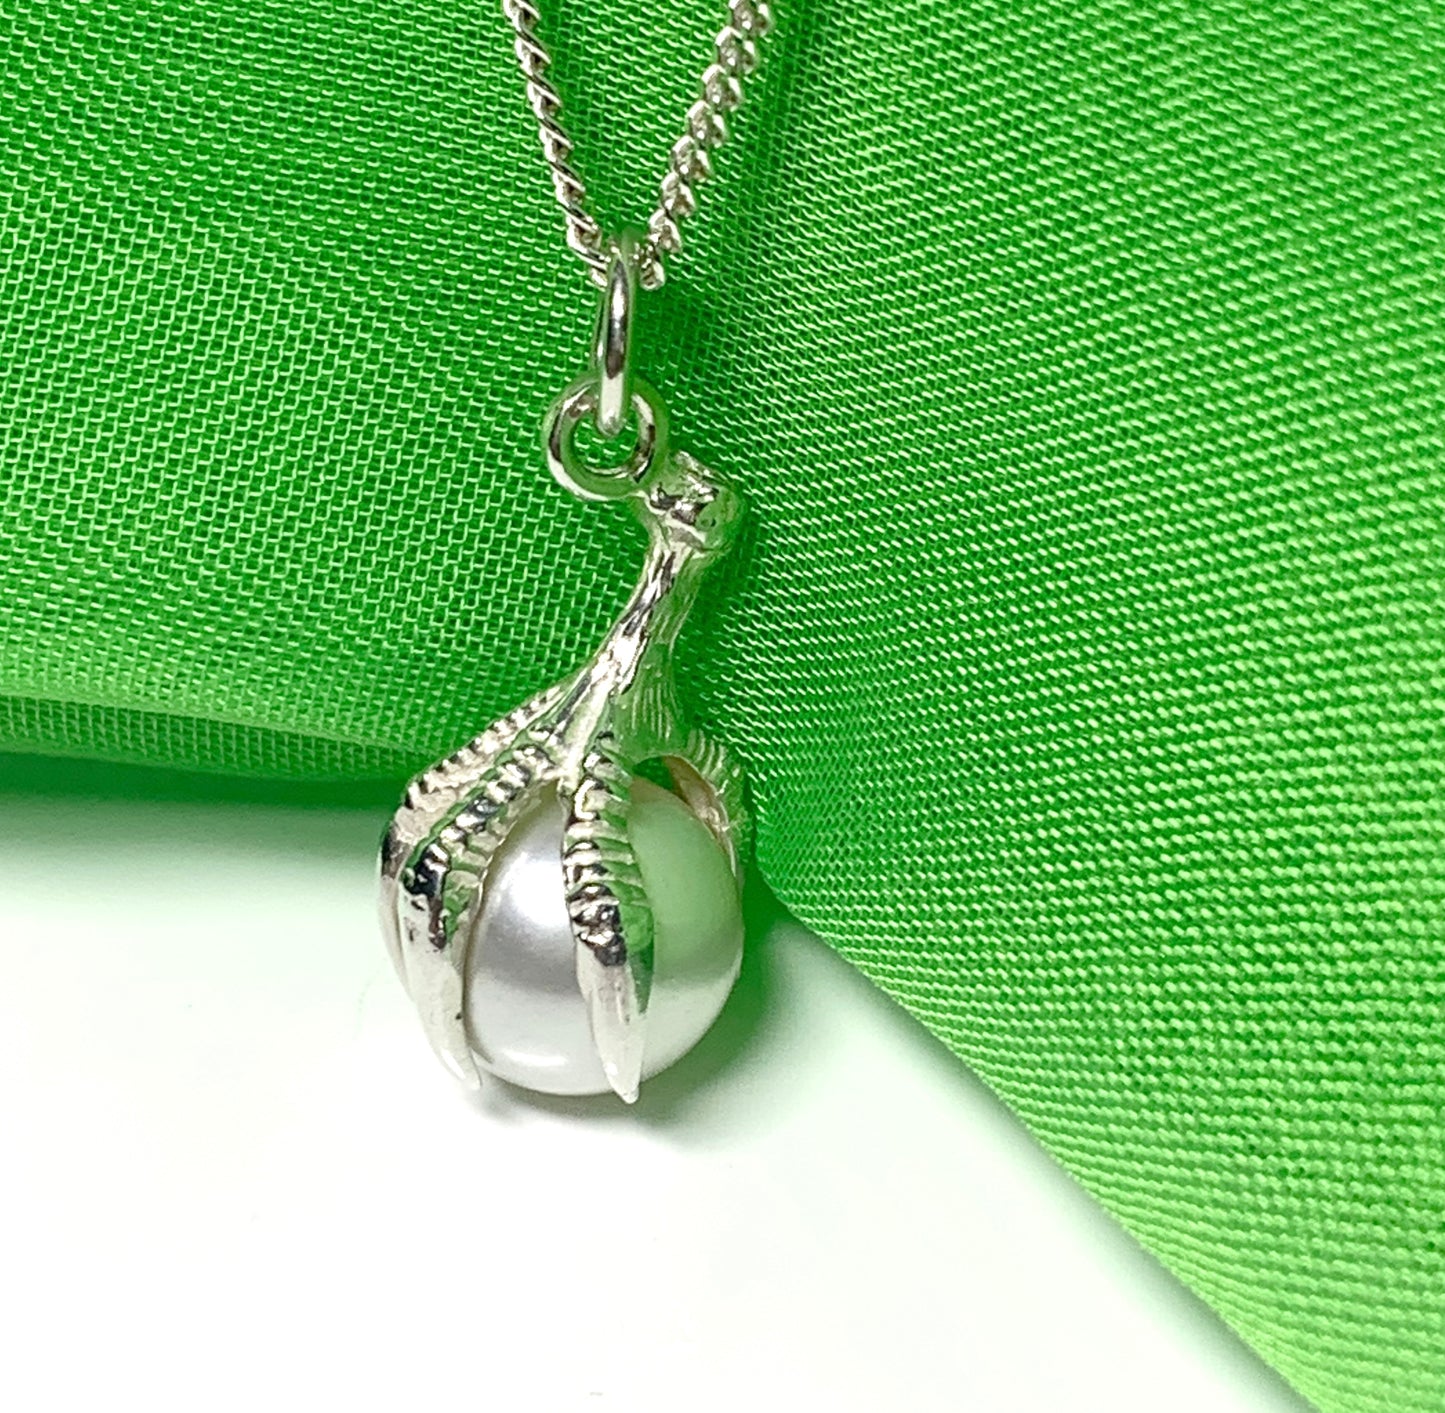 Bird of Prey talon hooked claw real freshwater pearl necklace silver